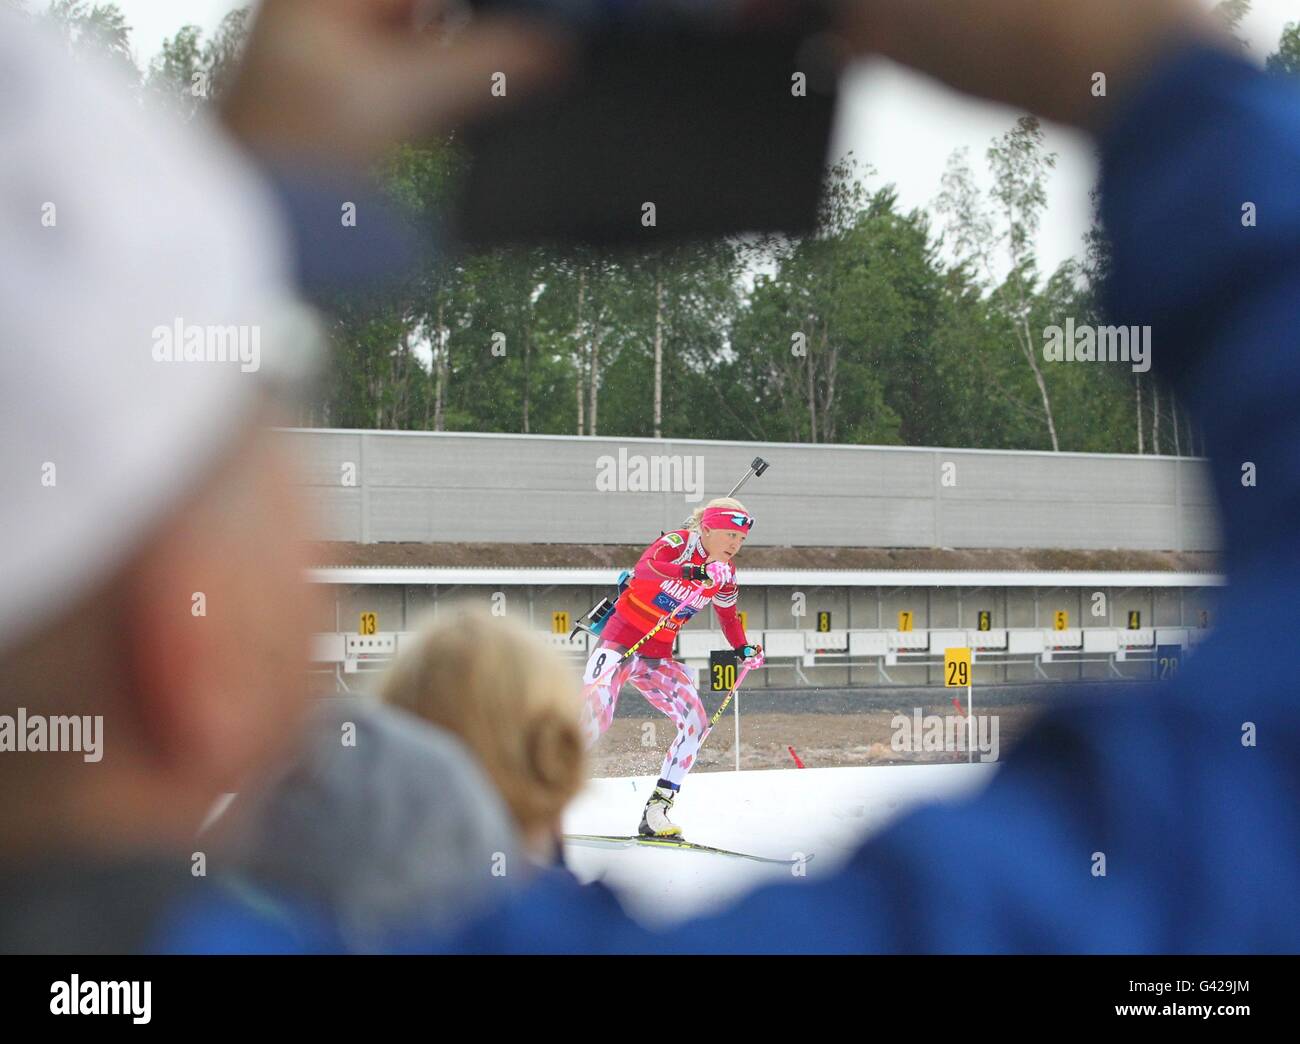 Imatra, Finland. 17th June, 2016. A spectator takes photos for a skier during a biathlon event in Imatra, Finland, on June 17, 2016. The some 500 meters long skiing track was made of last winter's natural snow. Eight skiers from Finland, Russia and Italy took part in the competition. © Li Jizhi/Xinhua/Alamy Live News Stock Photo